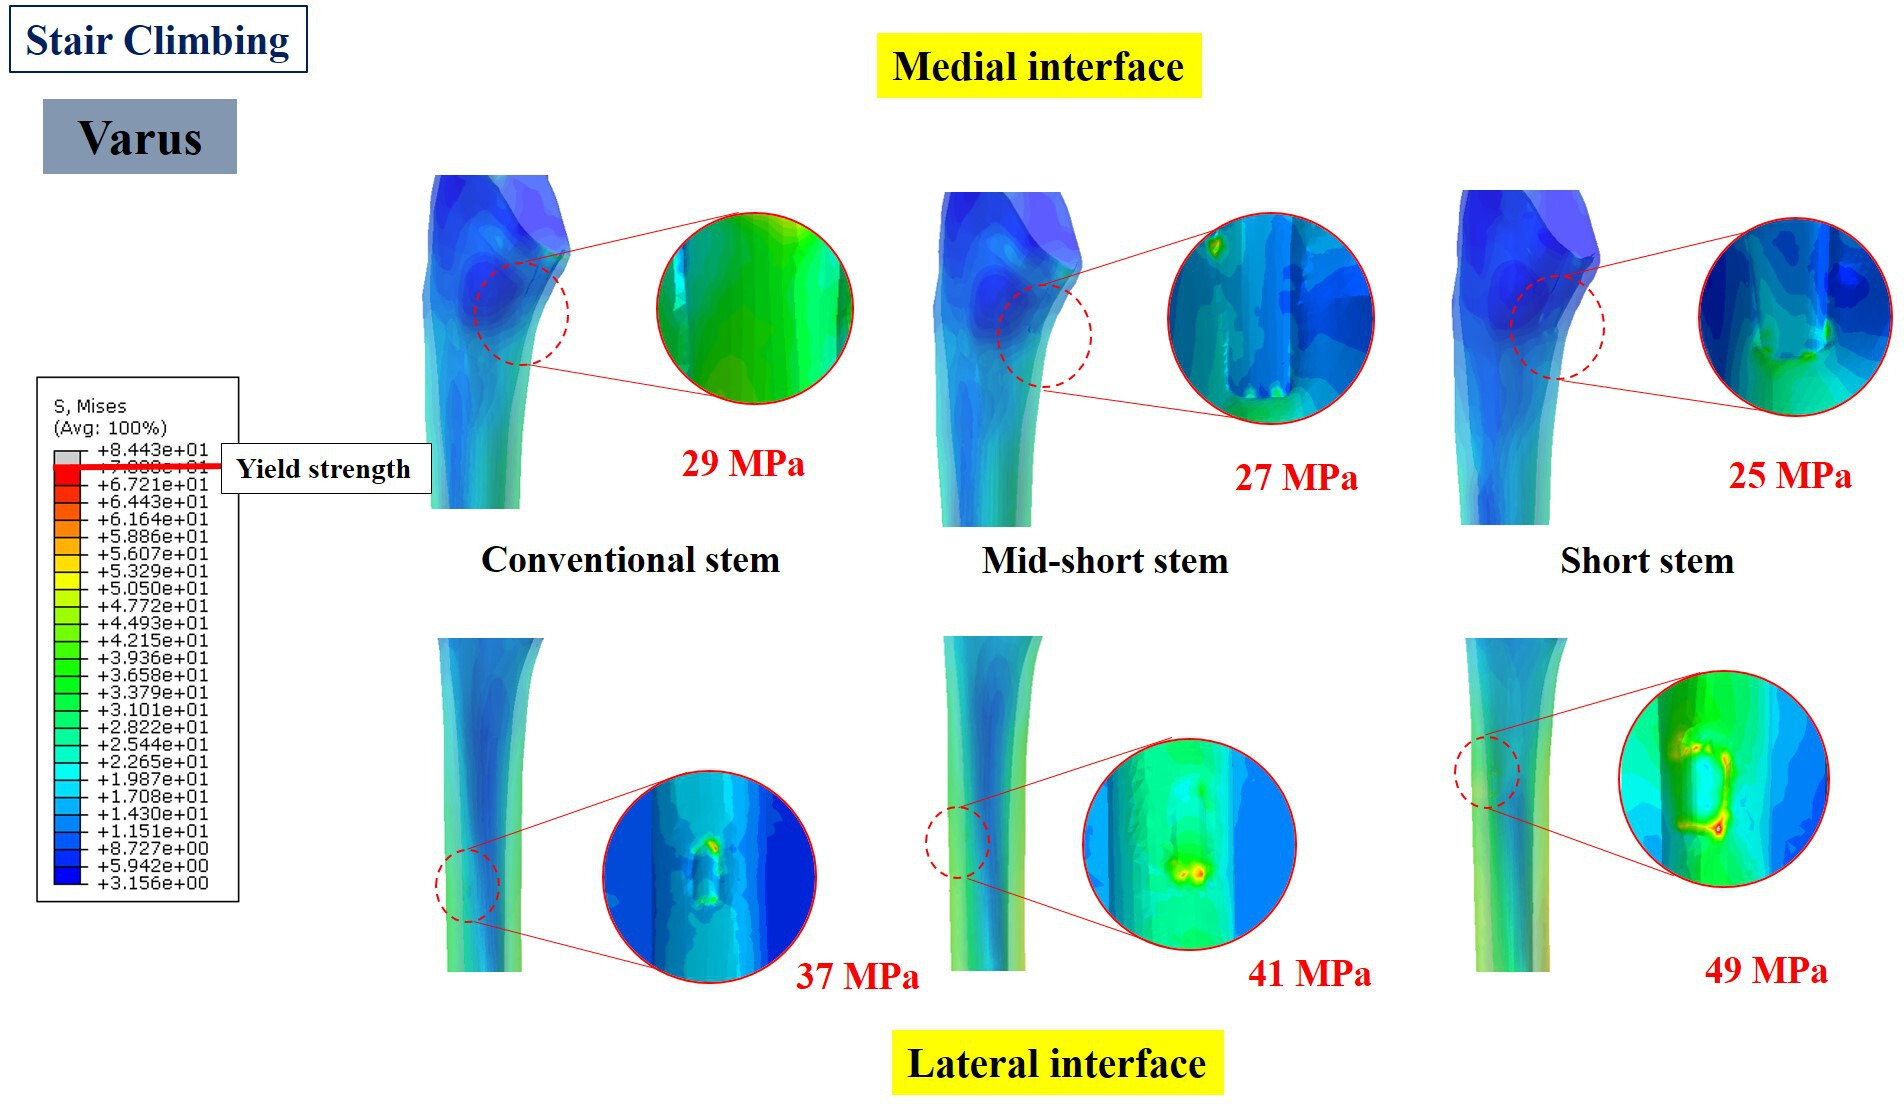 Fig. 4 
            Stress distribution at the medial and lateral interfaces of the cortical bone around the varus-inserted stem in stair-climbing condition. The circle images represent the stress concentration at medial calcar and lateral cortex region in contact with the stem tip. The number indicates the mean stress over a region of interest.
          